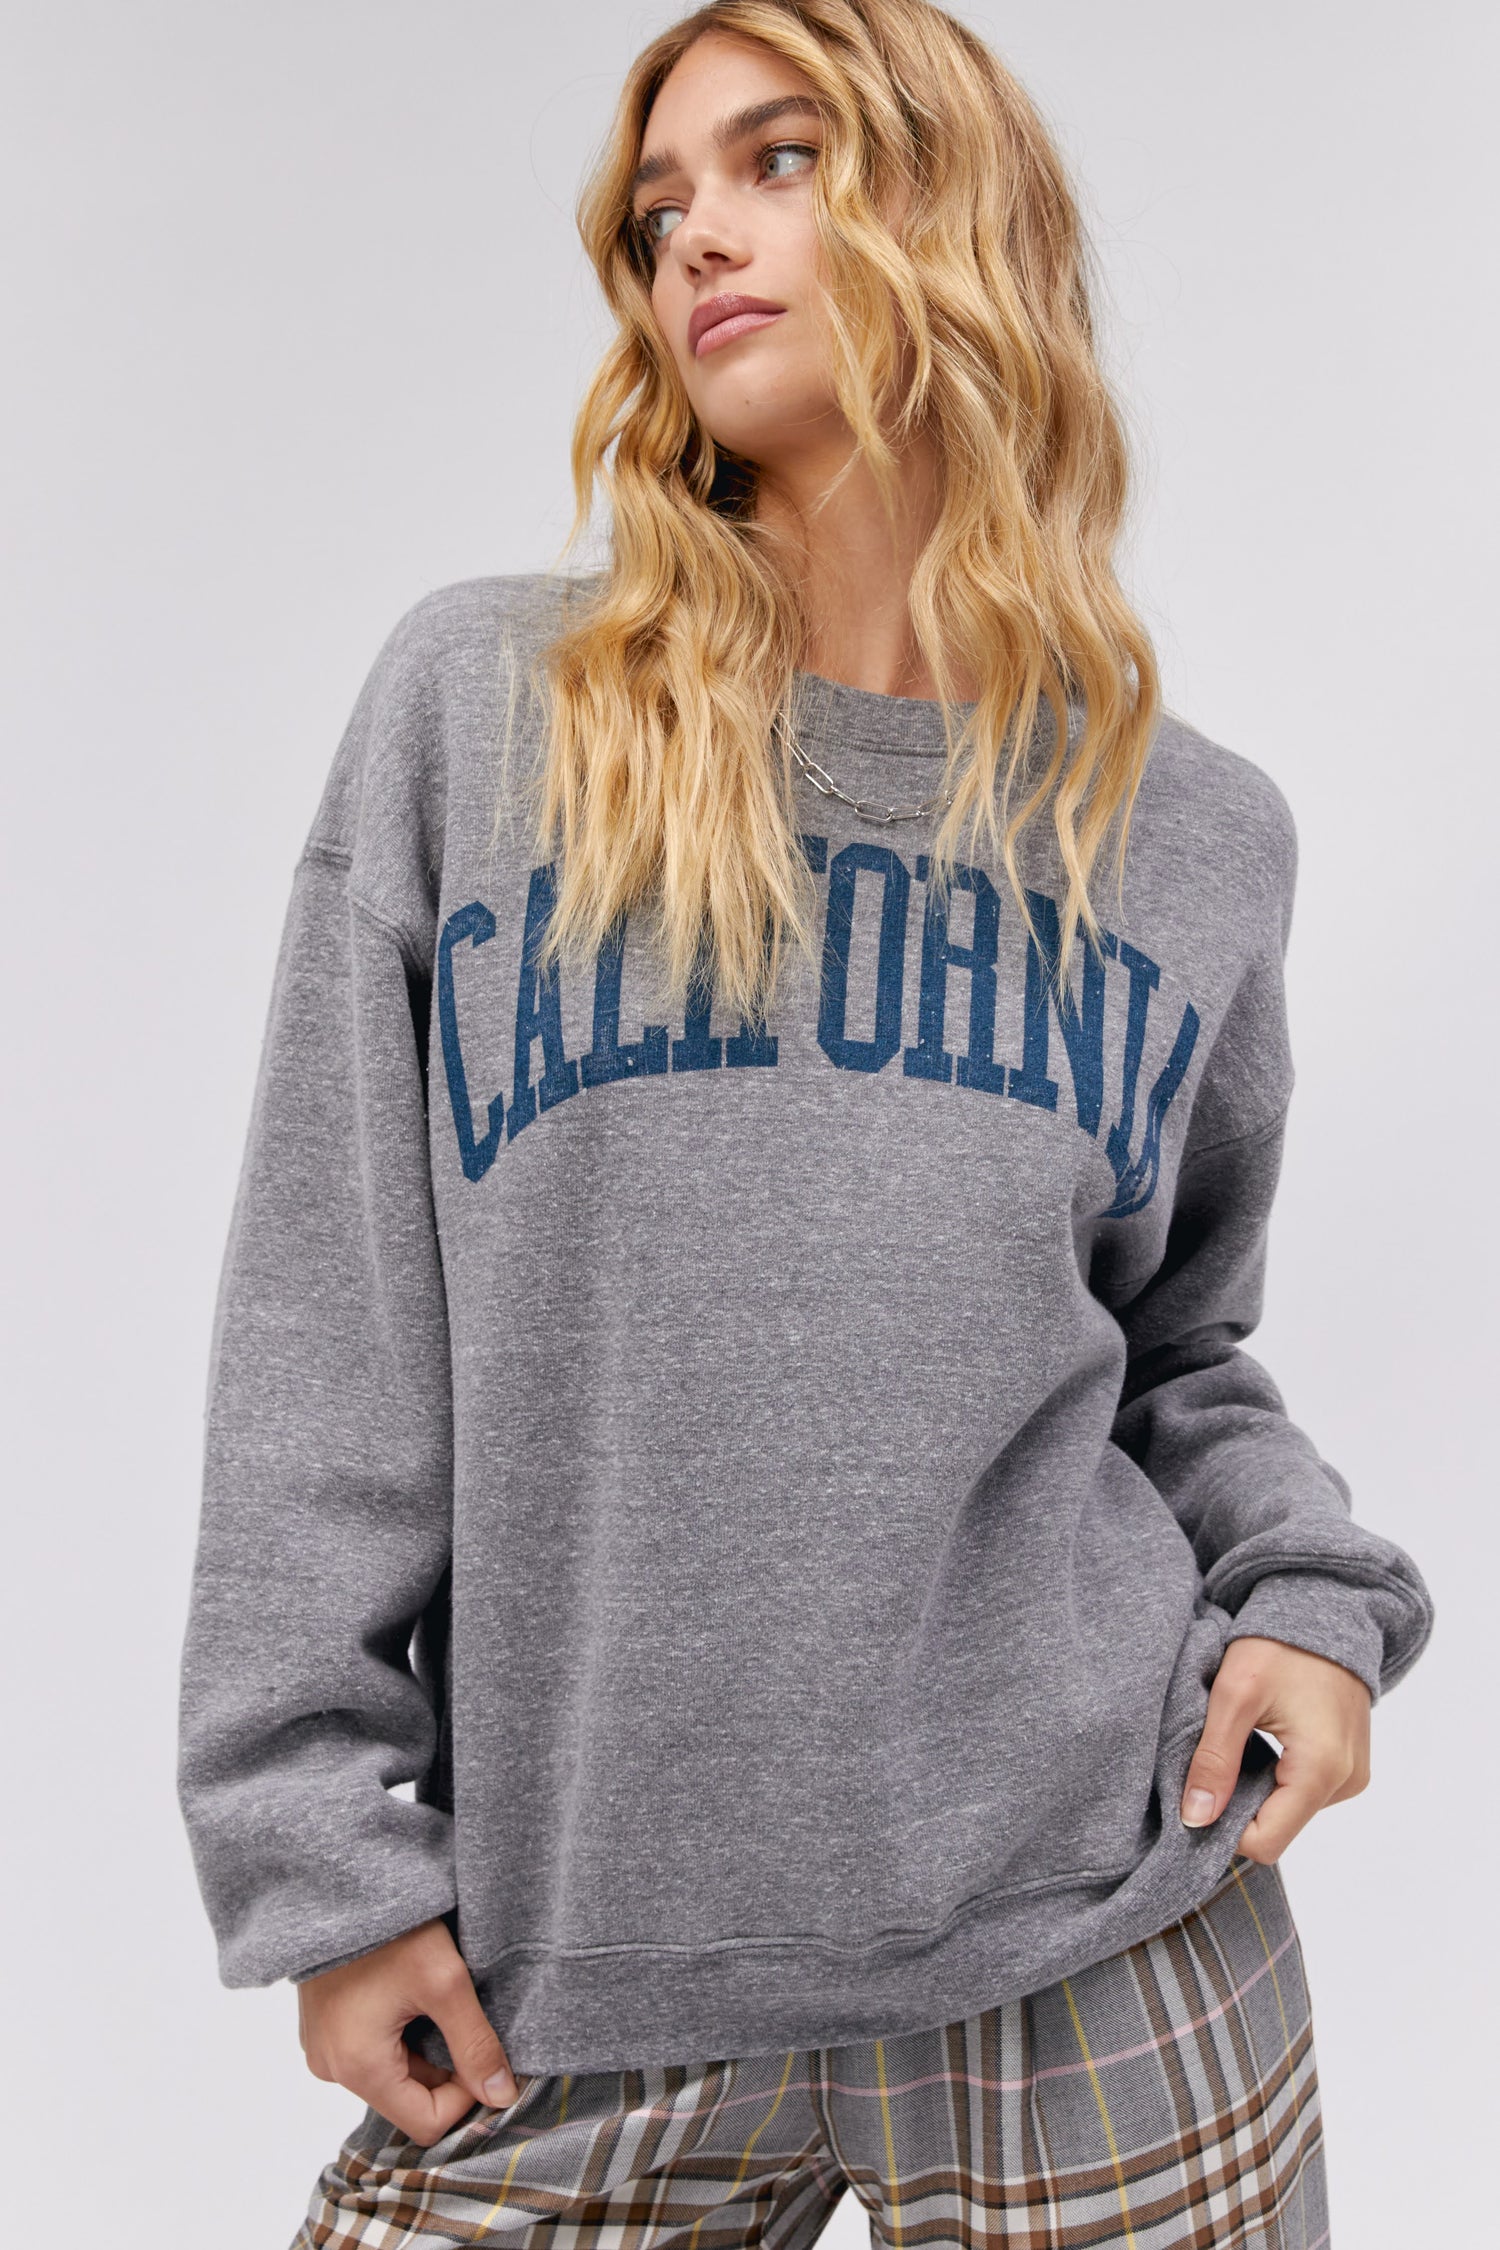 A blonde curly-haired model featuring a grey boyfriend crew stamped with 'California' in collegiate style letters.